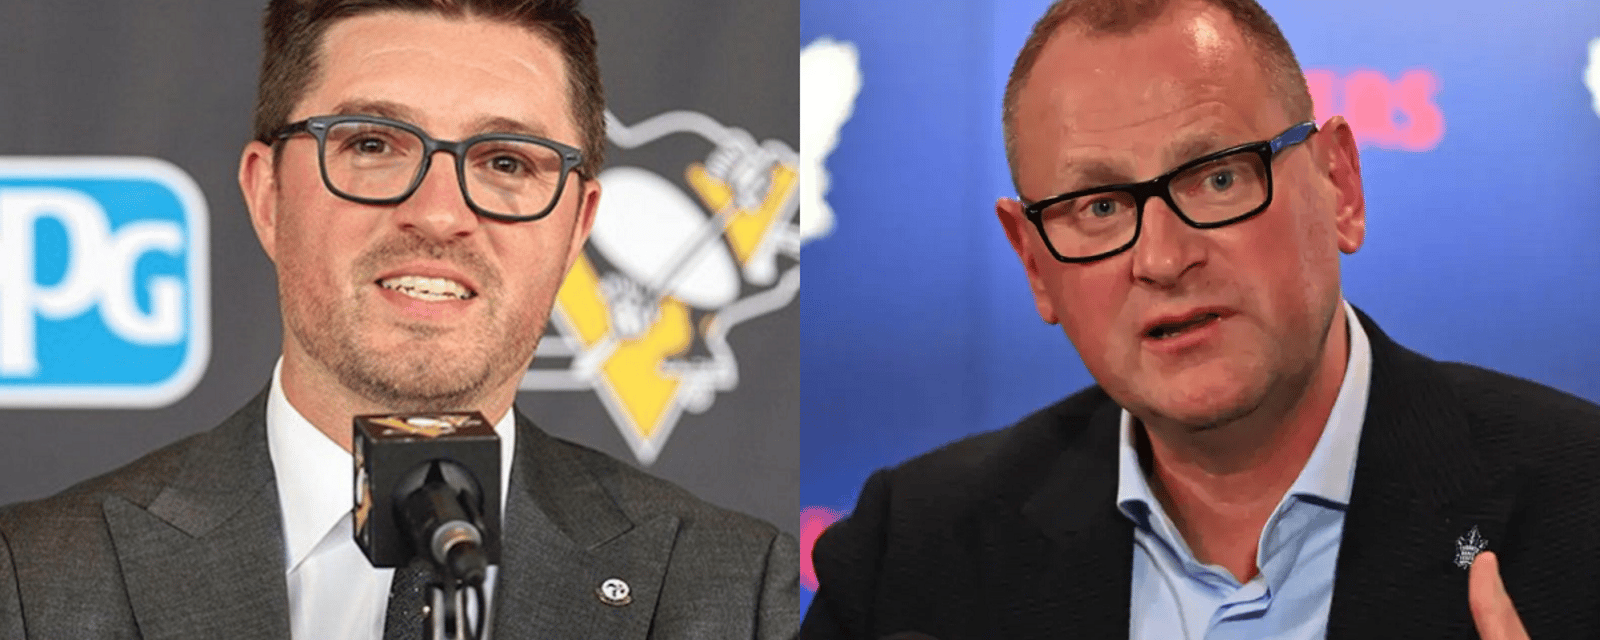 Kyle Dubas shares his honest thoughts on the Brad Treliving hire.